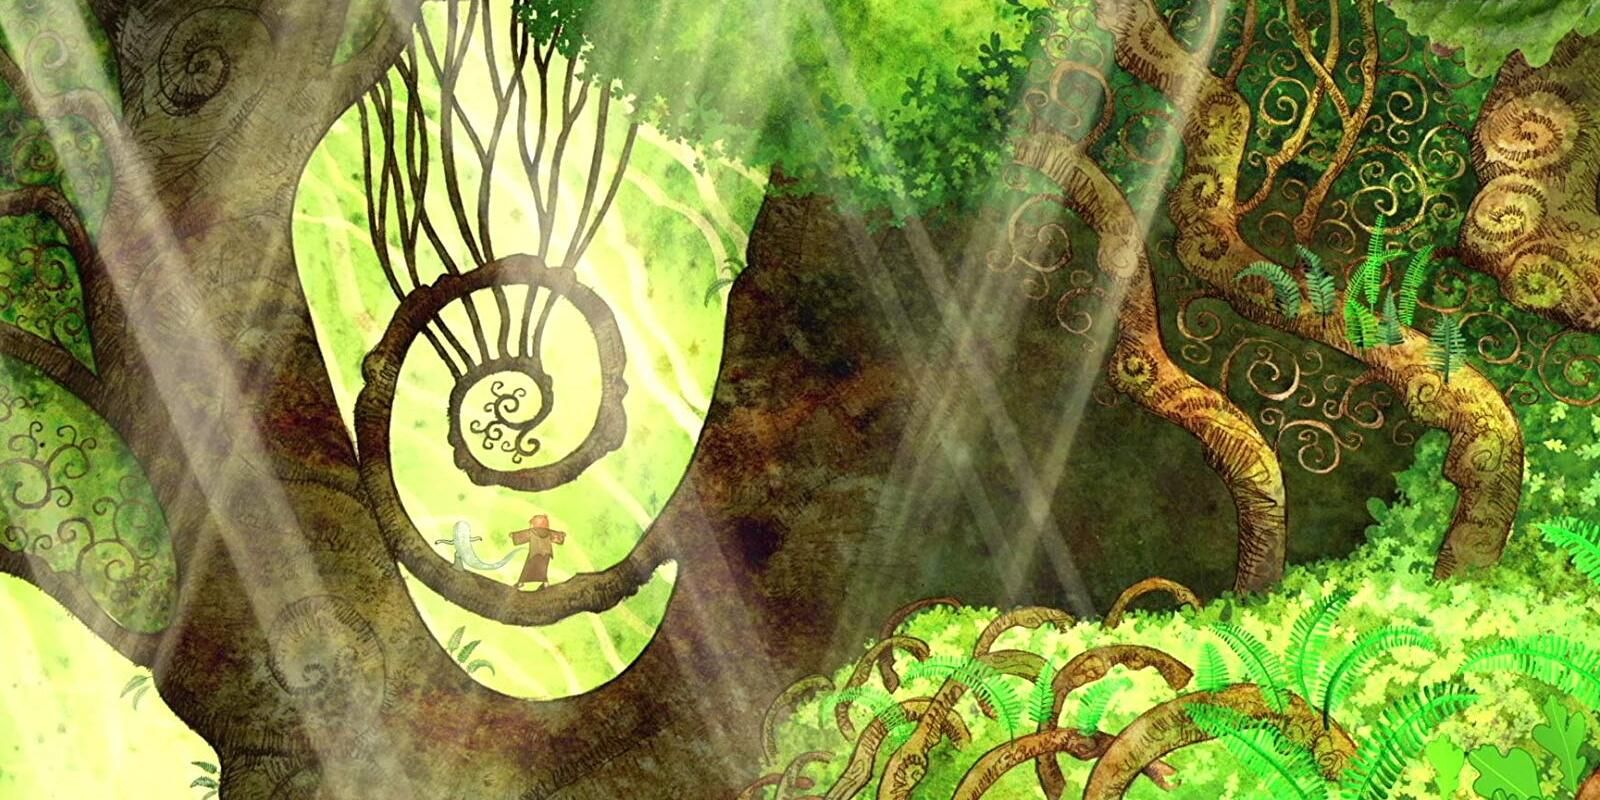 An image from The Secret of Kells